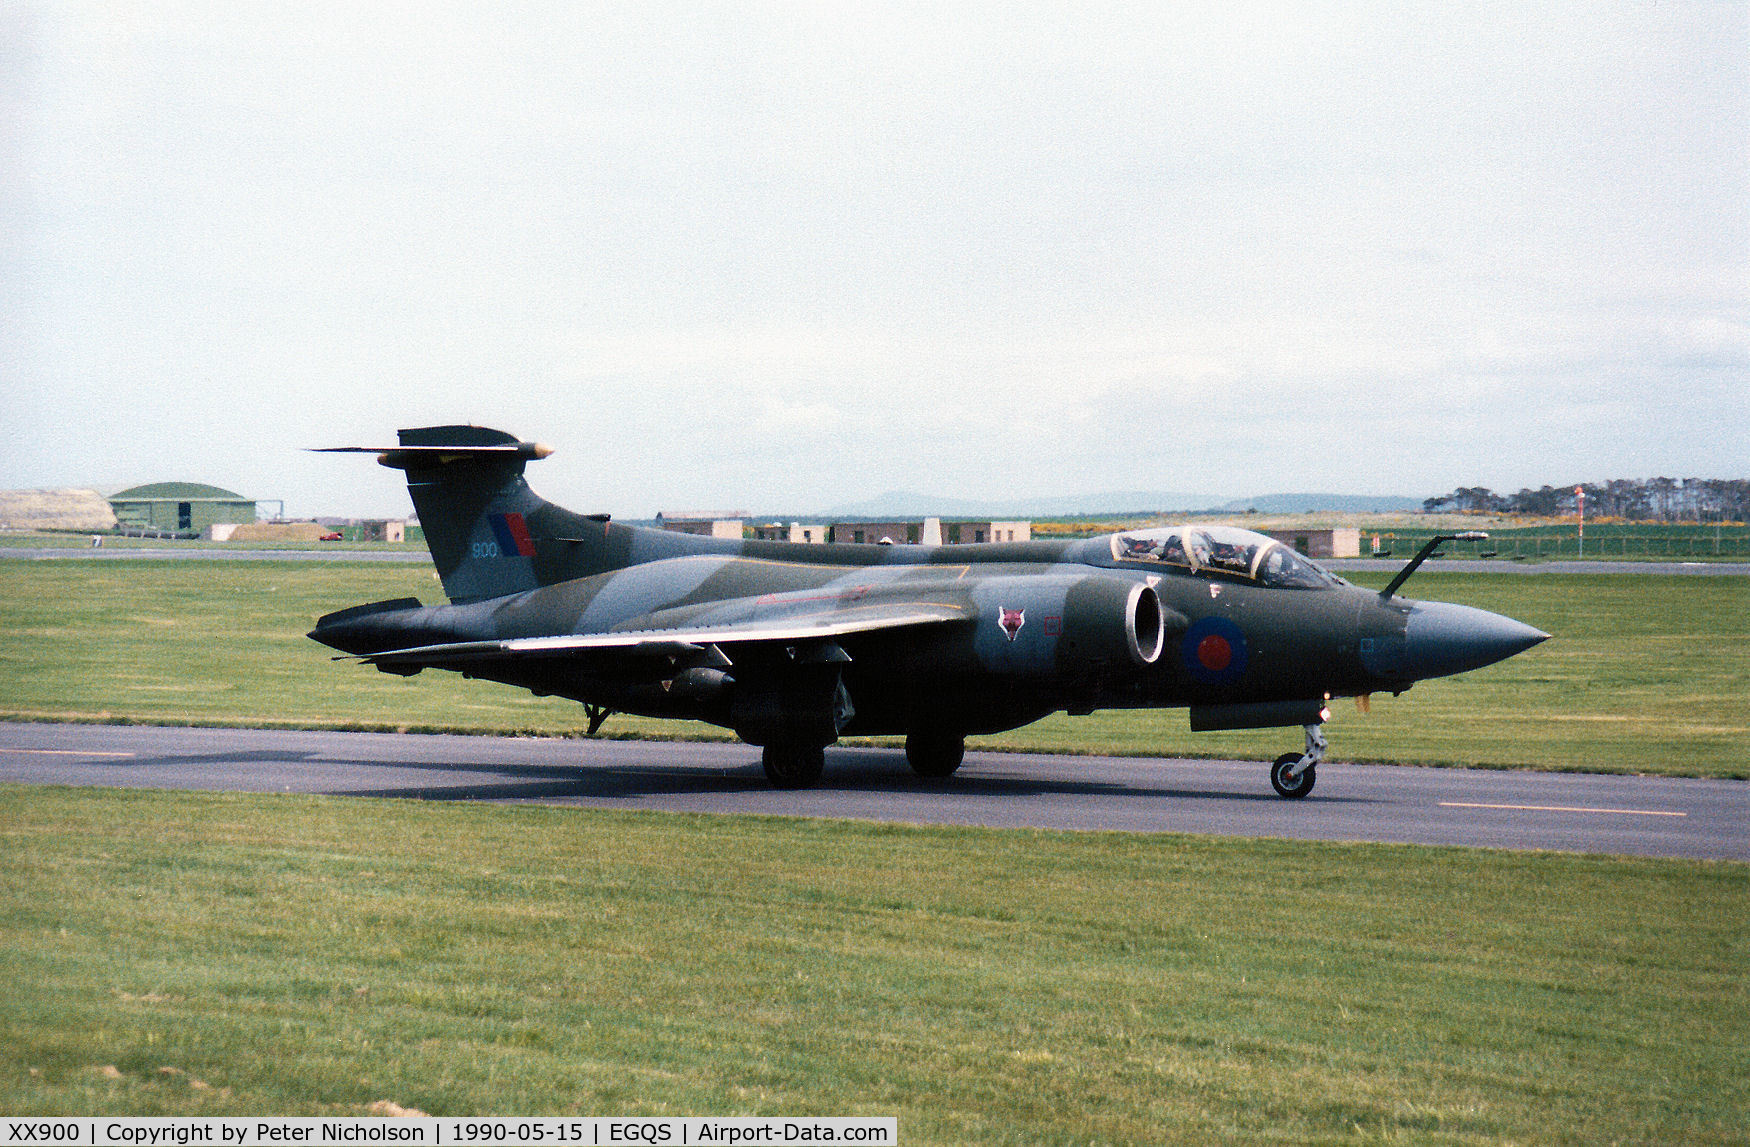 XX900, 1976 Hawker Siddeley Buccaneer S.2B C/N B3-05-75, Buccaneer S.2B of 12 Squadron taxying to Runway 05 at RAF Lossiemouth in May 1990.